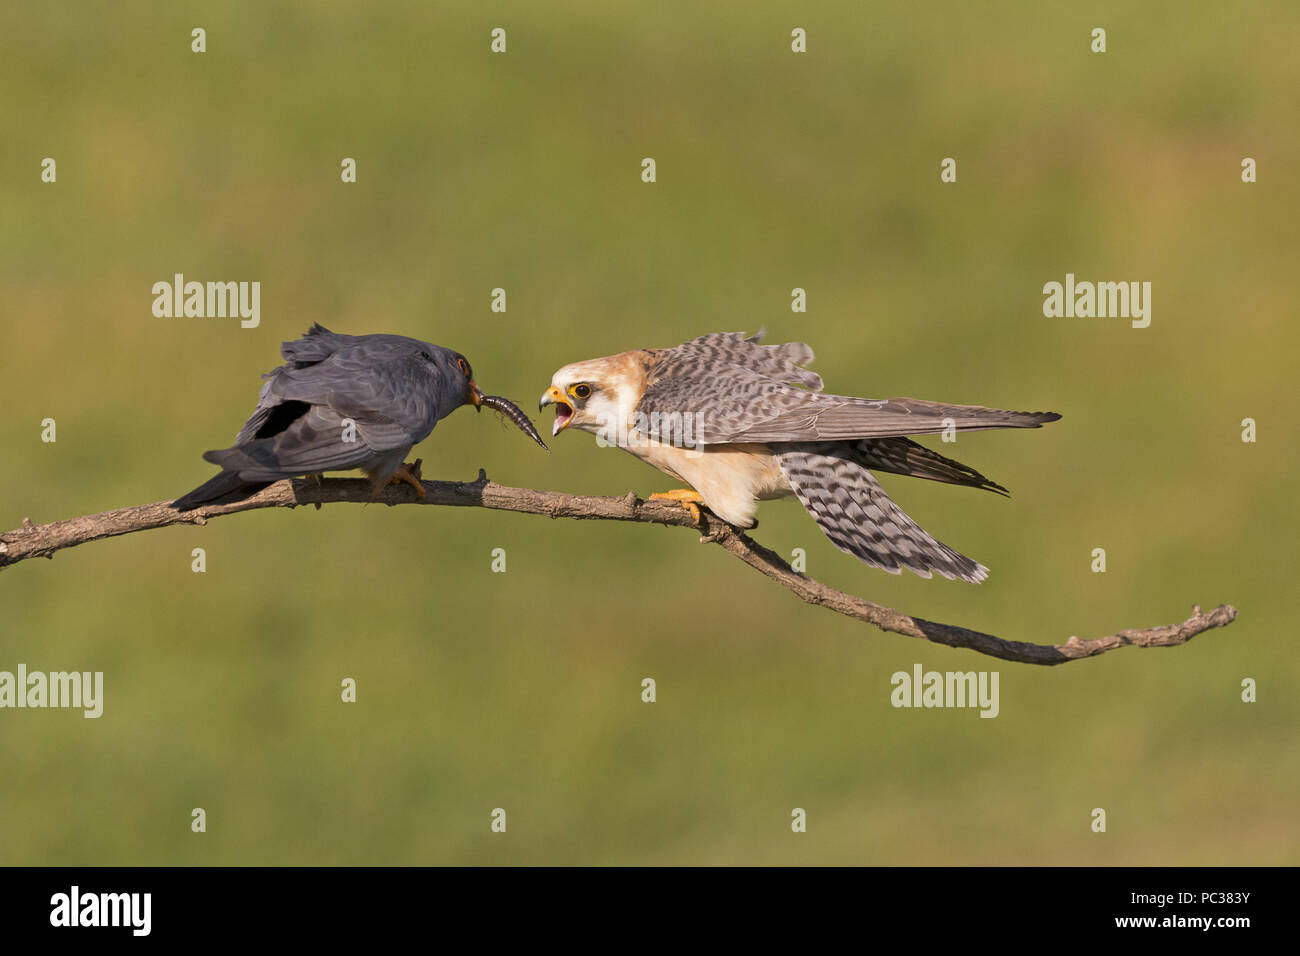 Red-footed Falcon (Falco vespertinus) adult pair, perched on twig, food passing, male feeding invertebrate prey to female, Hortobagy N.P., Hungary, Ma Stock Photo